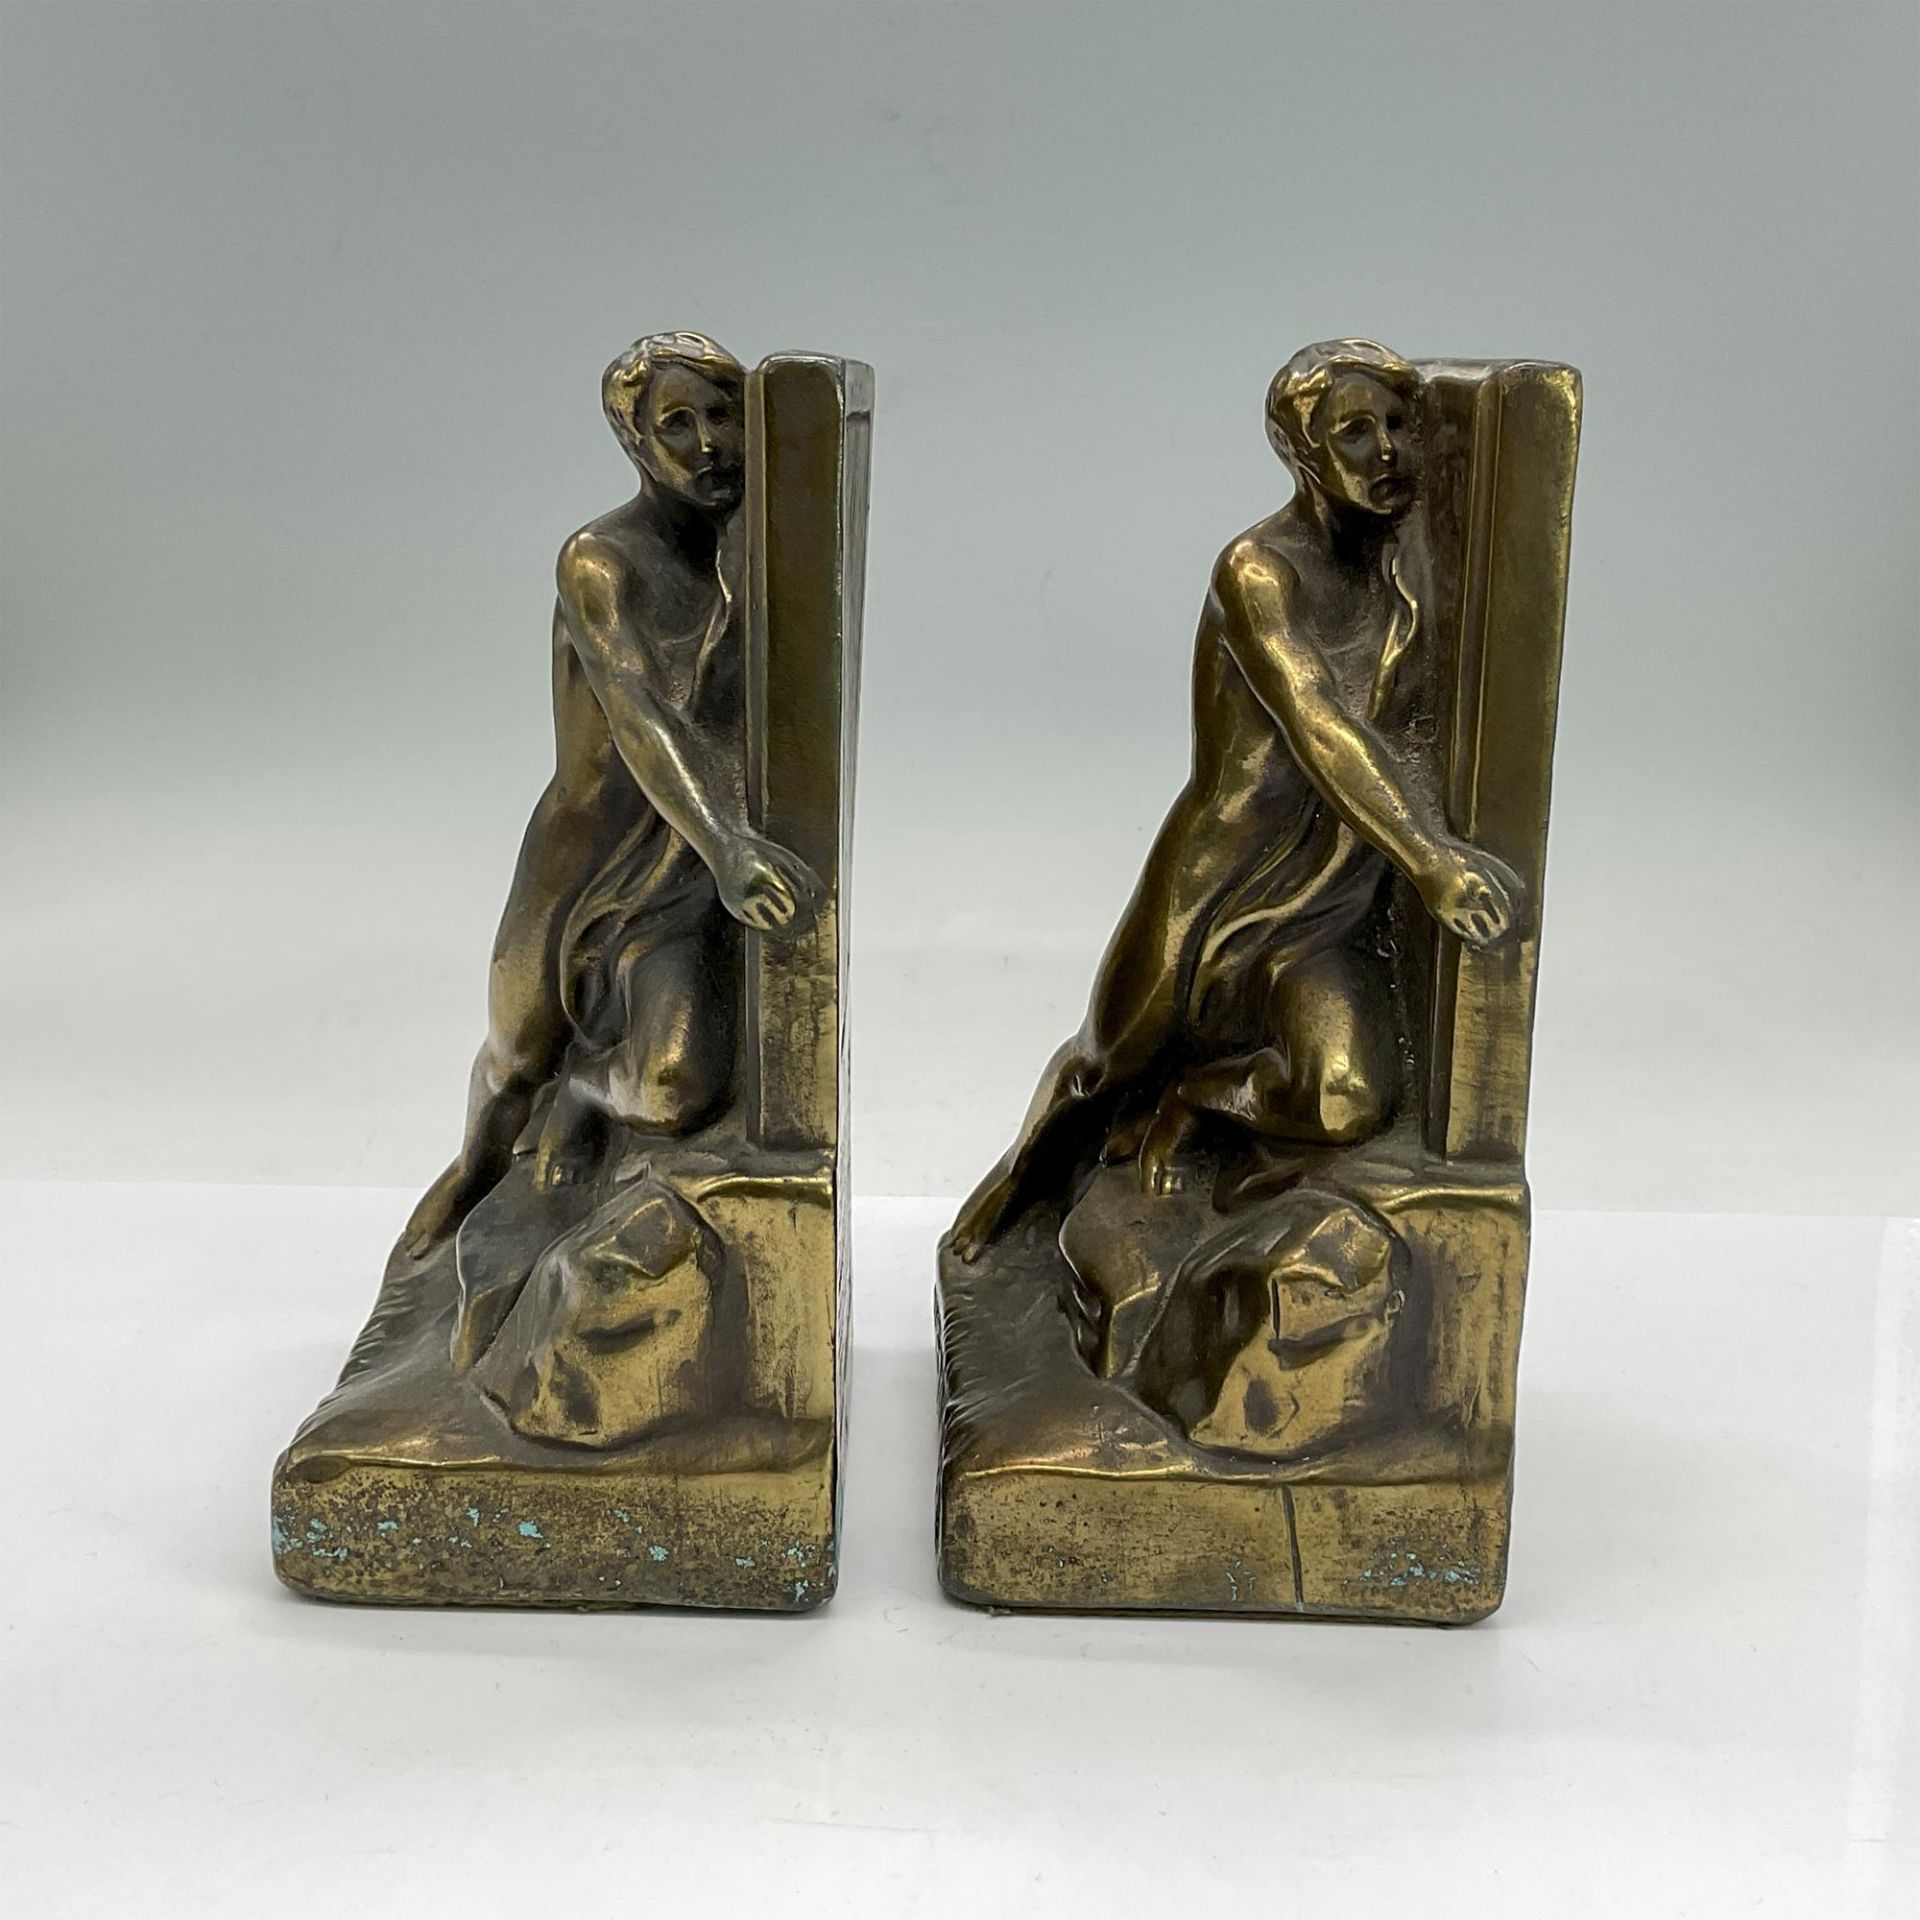 2pc Bronze Bookends, The Builder - Image 2 of 4